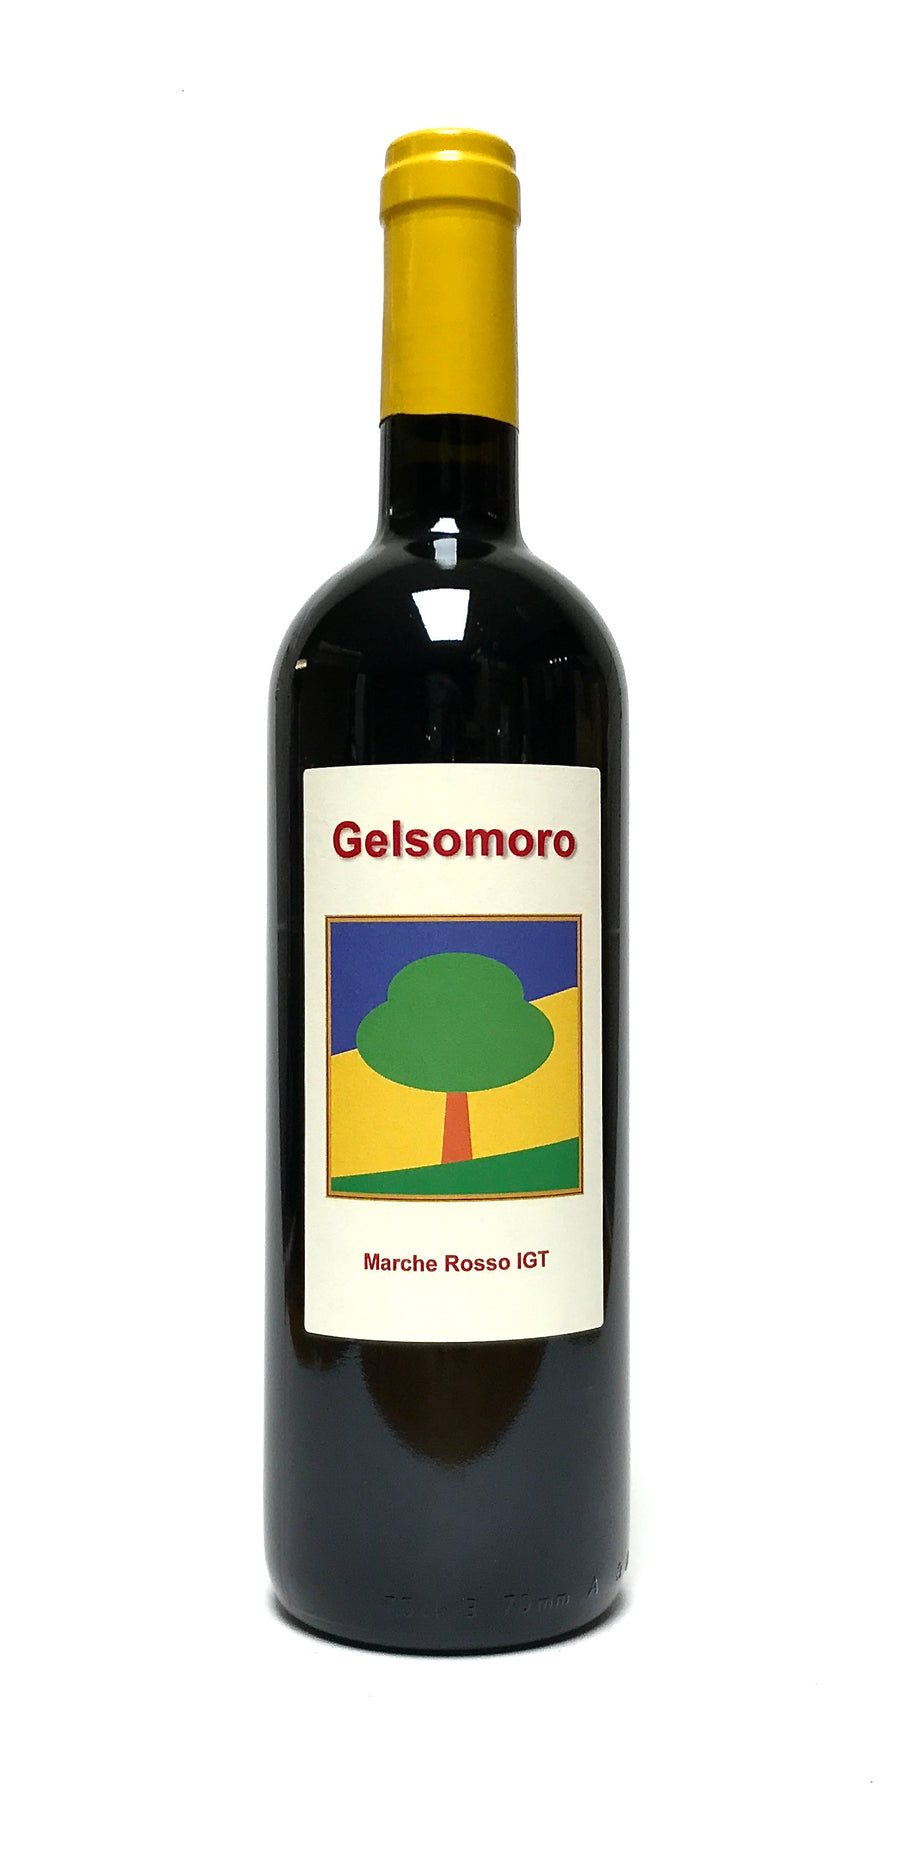 Gelsomoro 2018 Marche Rosso IGT